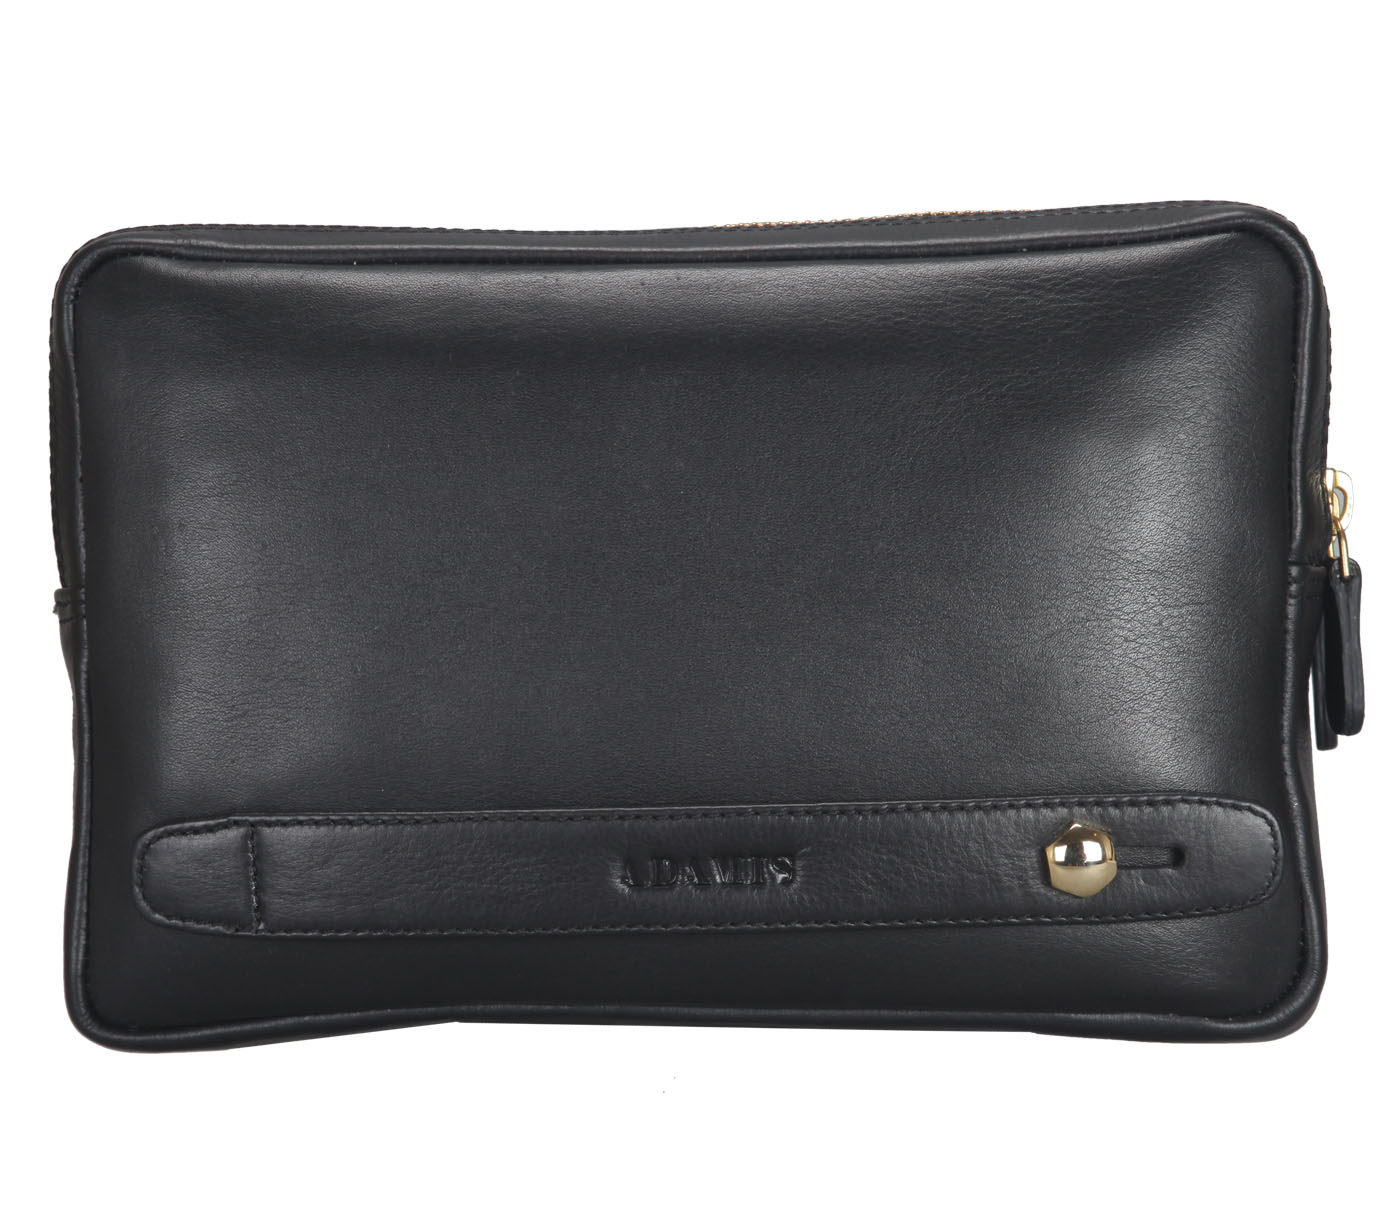 P32-Jesse-Men's Travel Pouch In Genuine Leather - Black